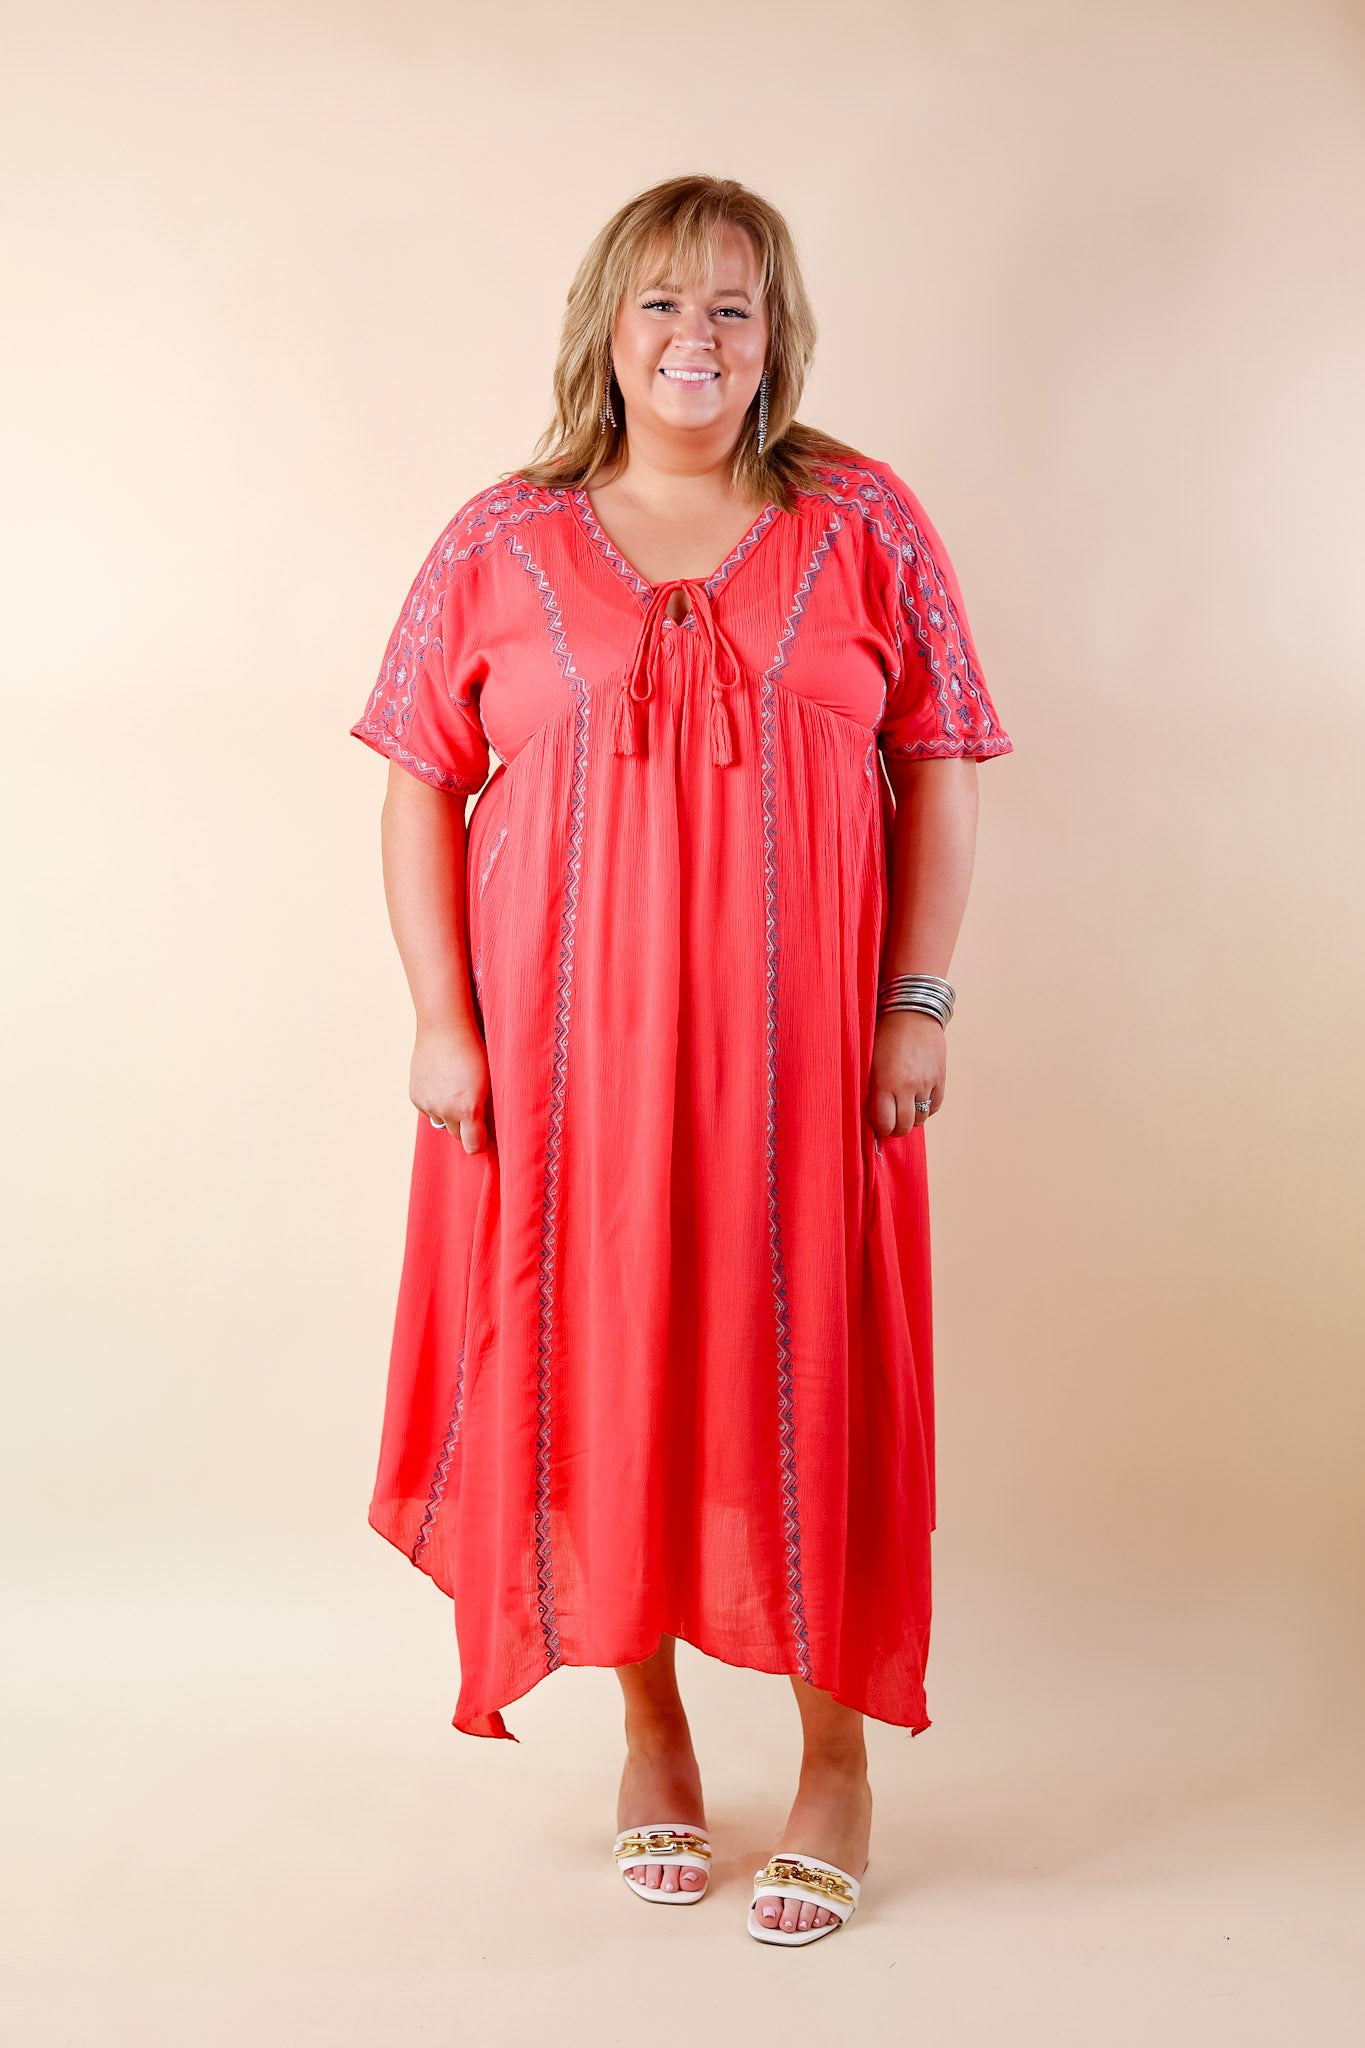 Just For You Embroidered Maxi Dress with Tassel Tie Neck in Coral - Giddy Up Glamour Boutique